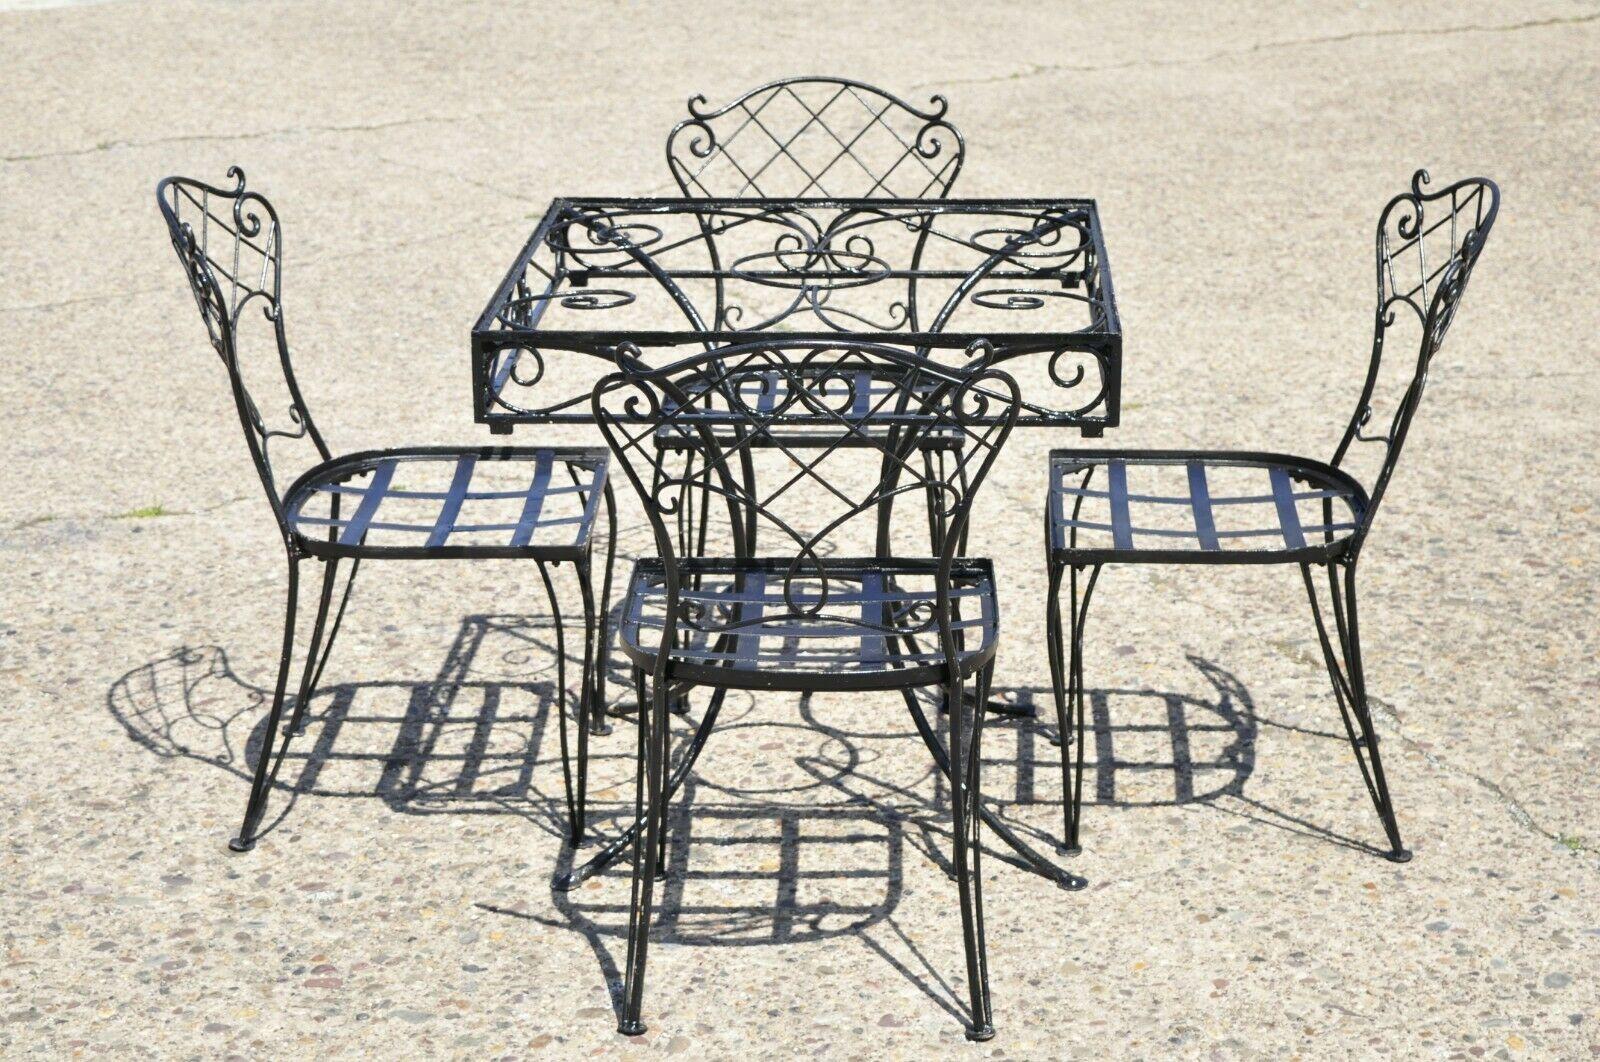 Vintage Wrought Iron Garden Patio Dining Set Square Table 4 Chairs - 5 Pc Set. Item features (4) Side chairs, (1) Square dining table, unique scroll work design, fretwork backs, very nice vintage set, great style and form. Circa Mid 20th Century.